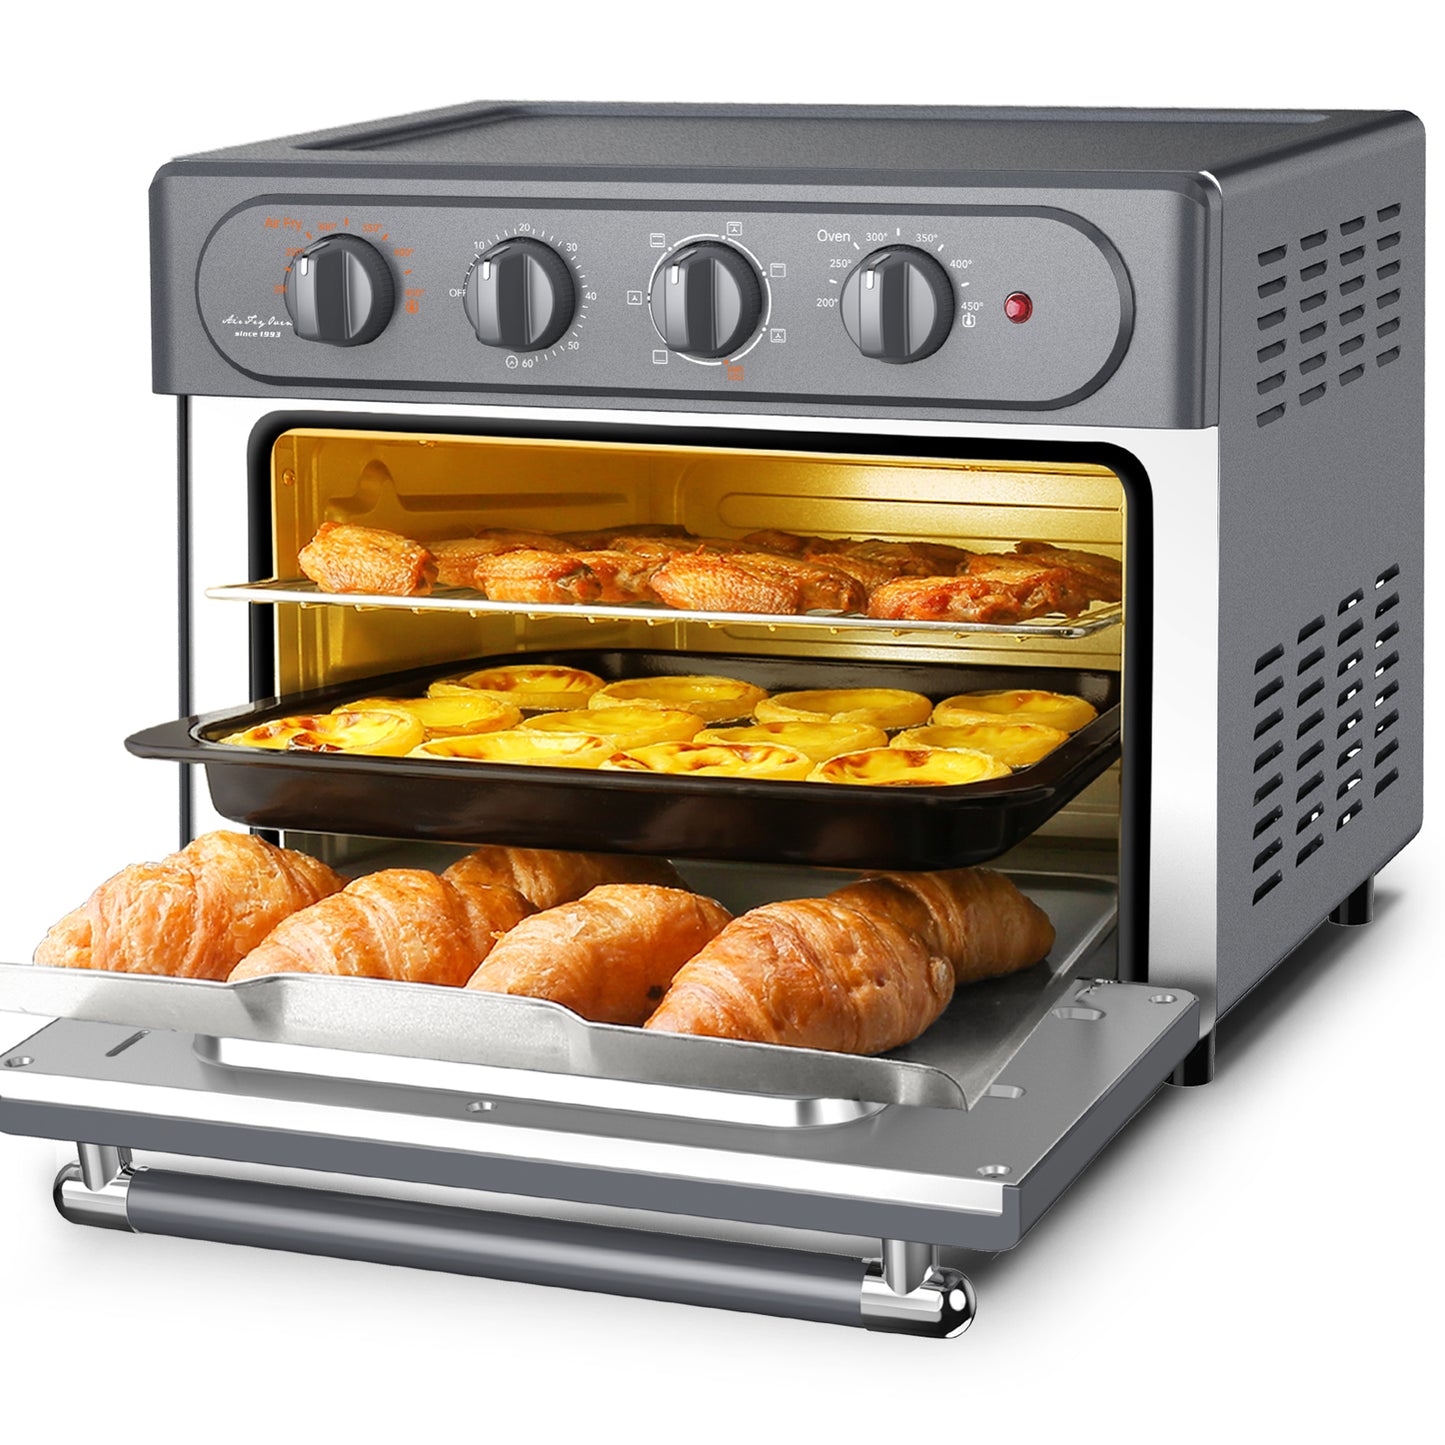 Air fryer pan oven 23L large capacity 7 in 1 convection oven